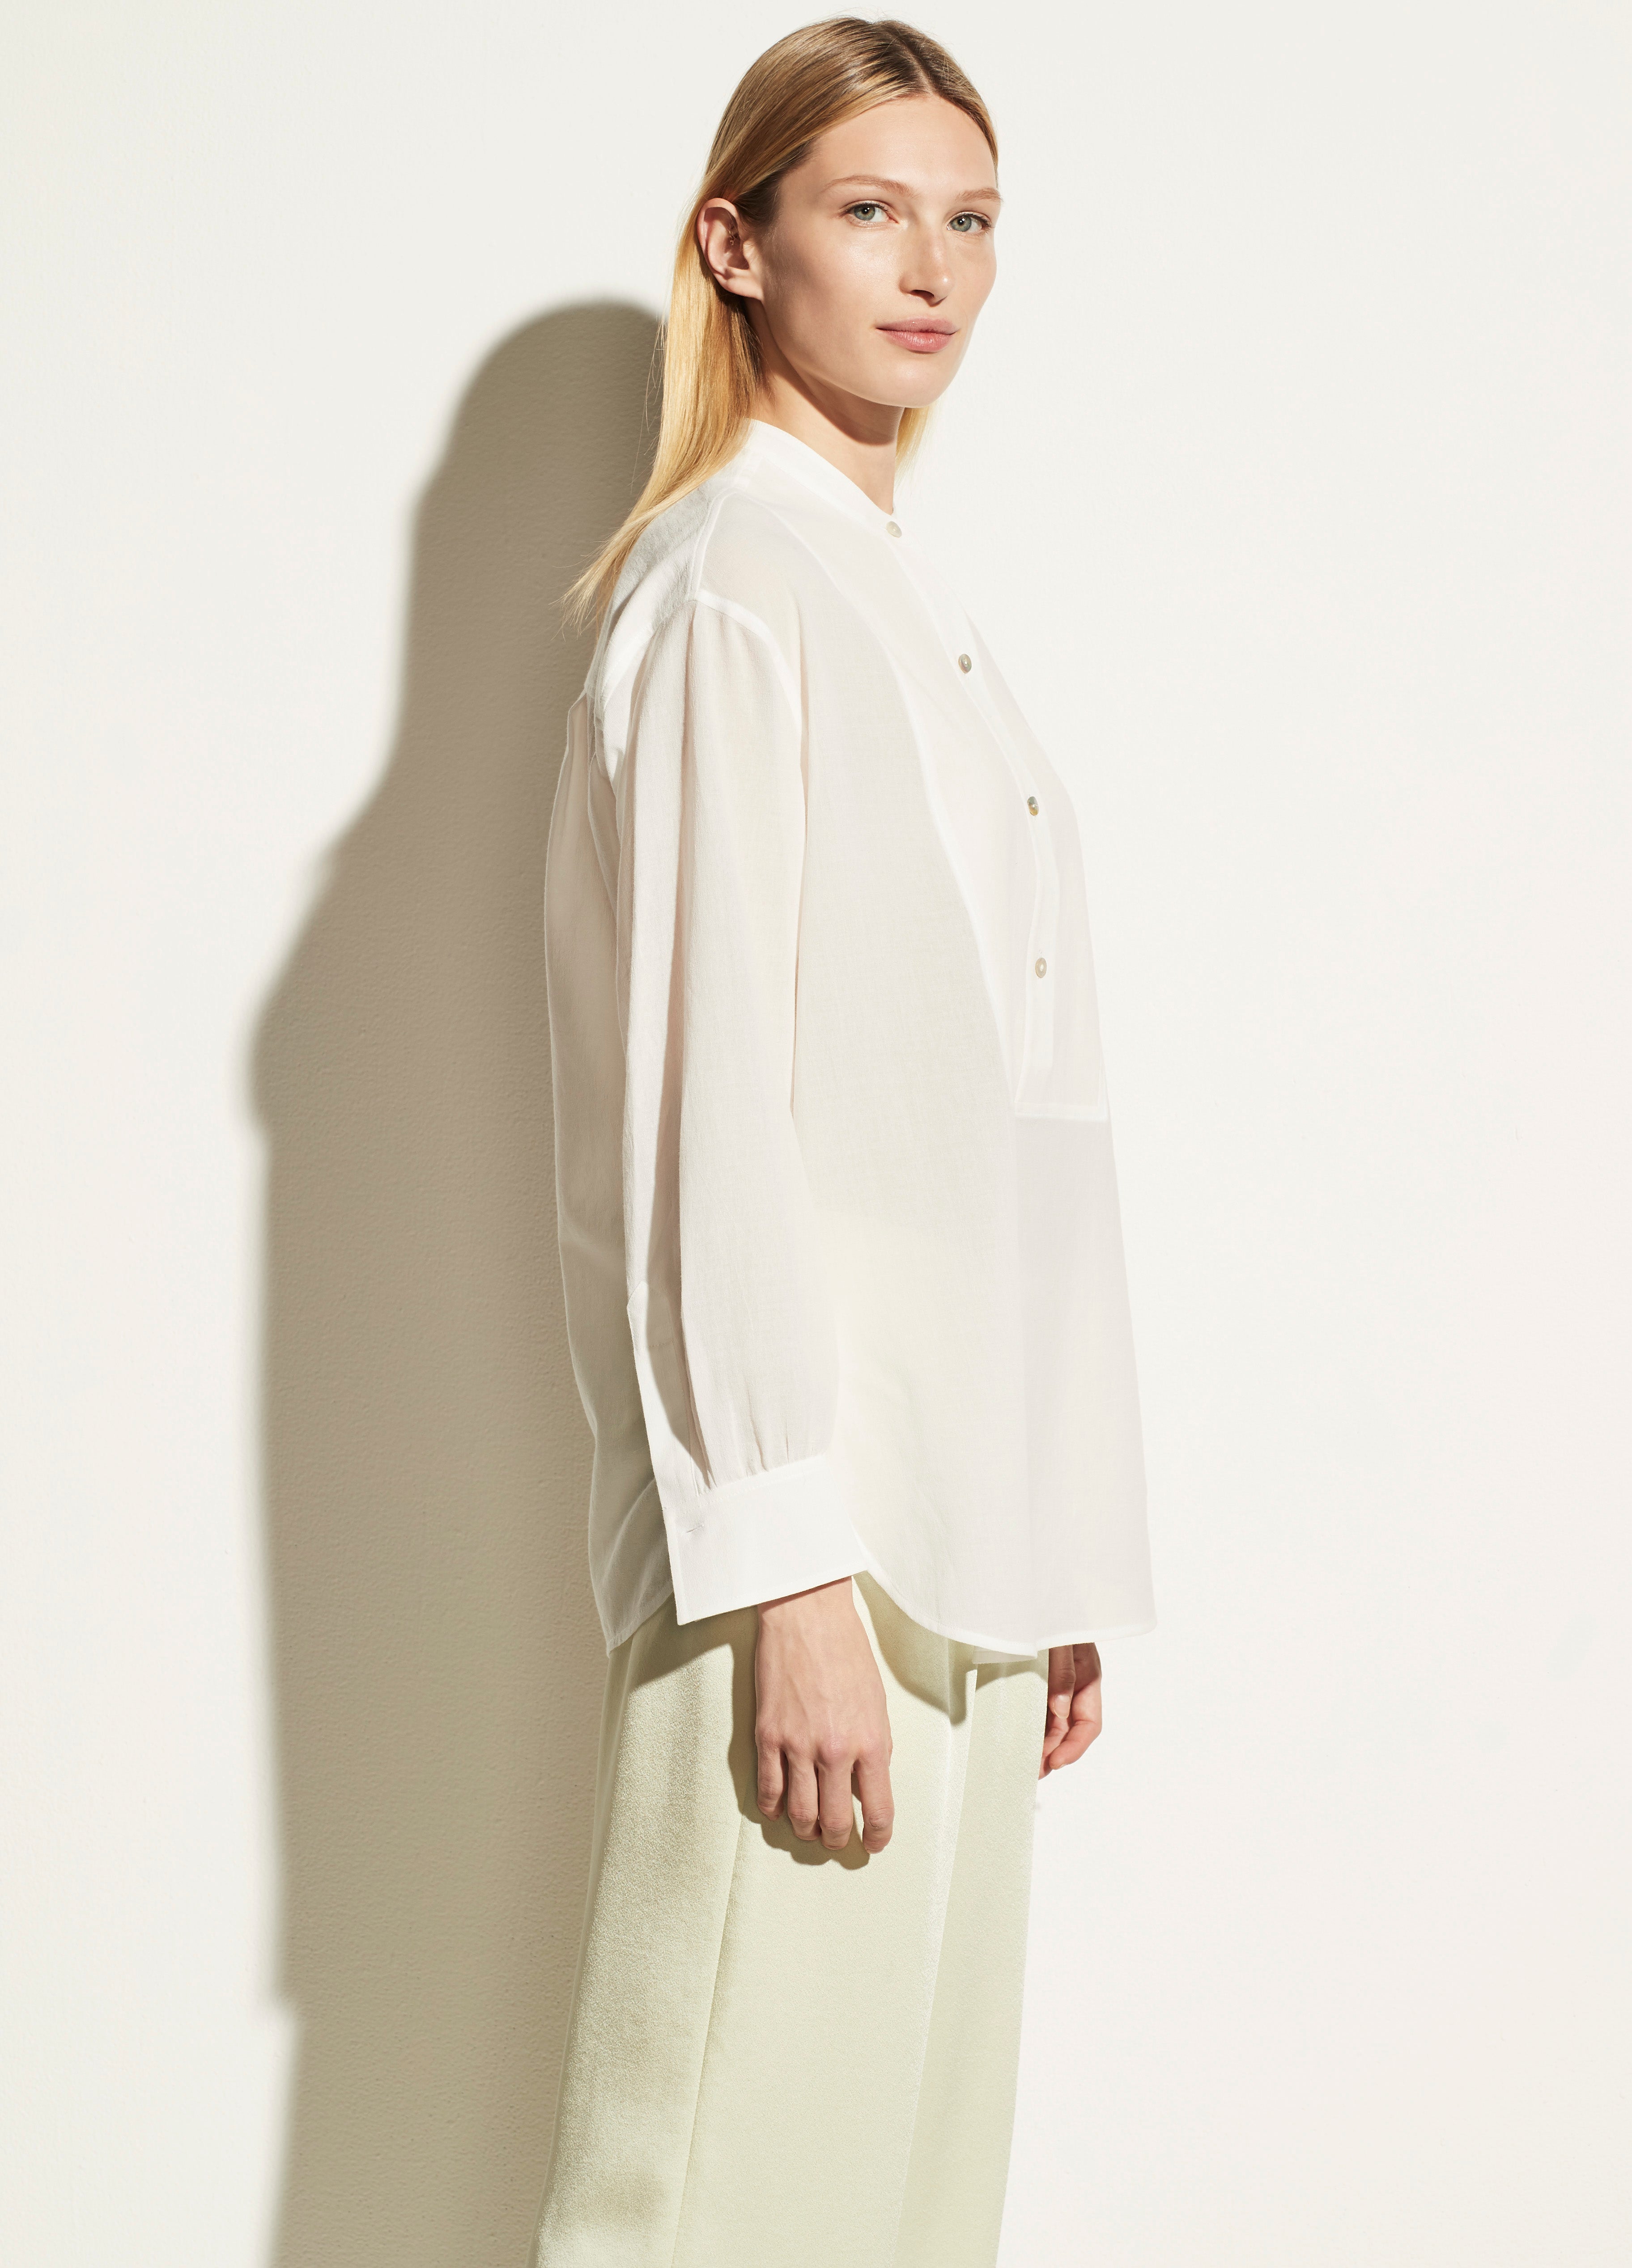 Vince | Easy Bib Front Button Down in Optic White | Vince Unfold